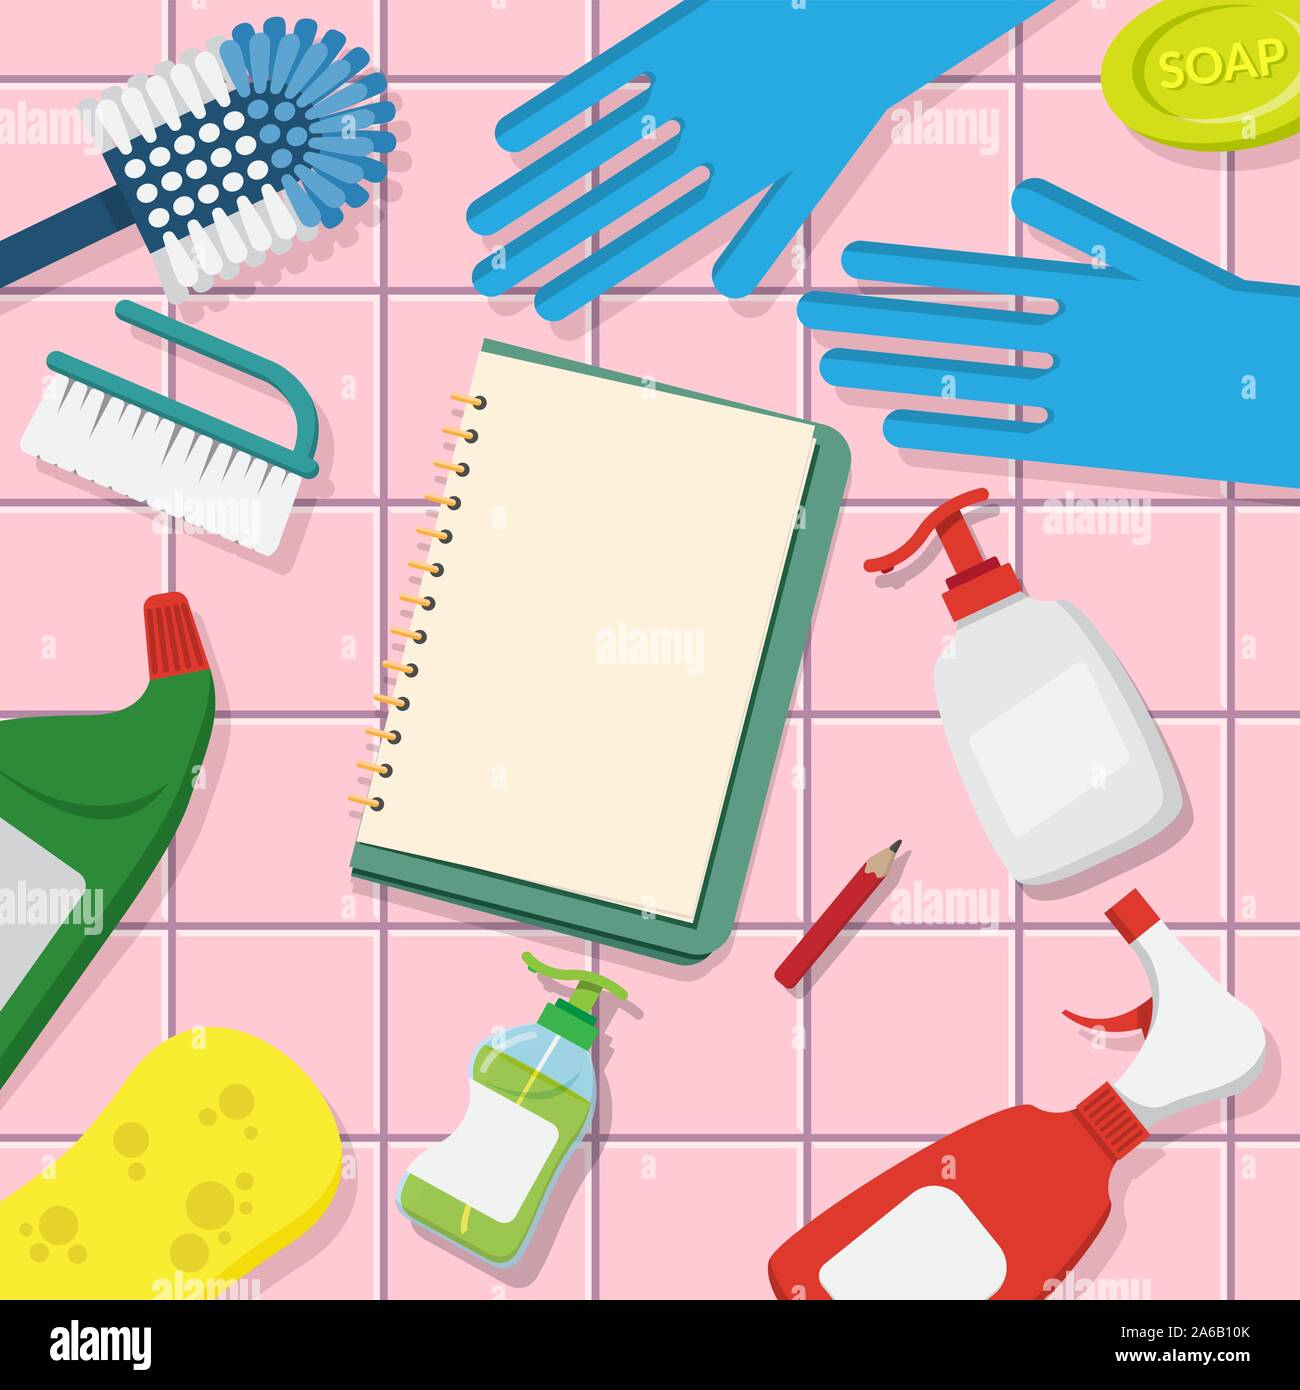 vector set of household supplies cleaning product , tools of house cleaning on pink tile background with blank page open book for copy space Stock Vector